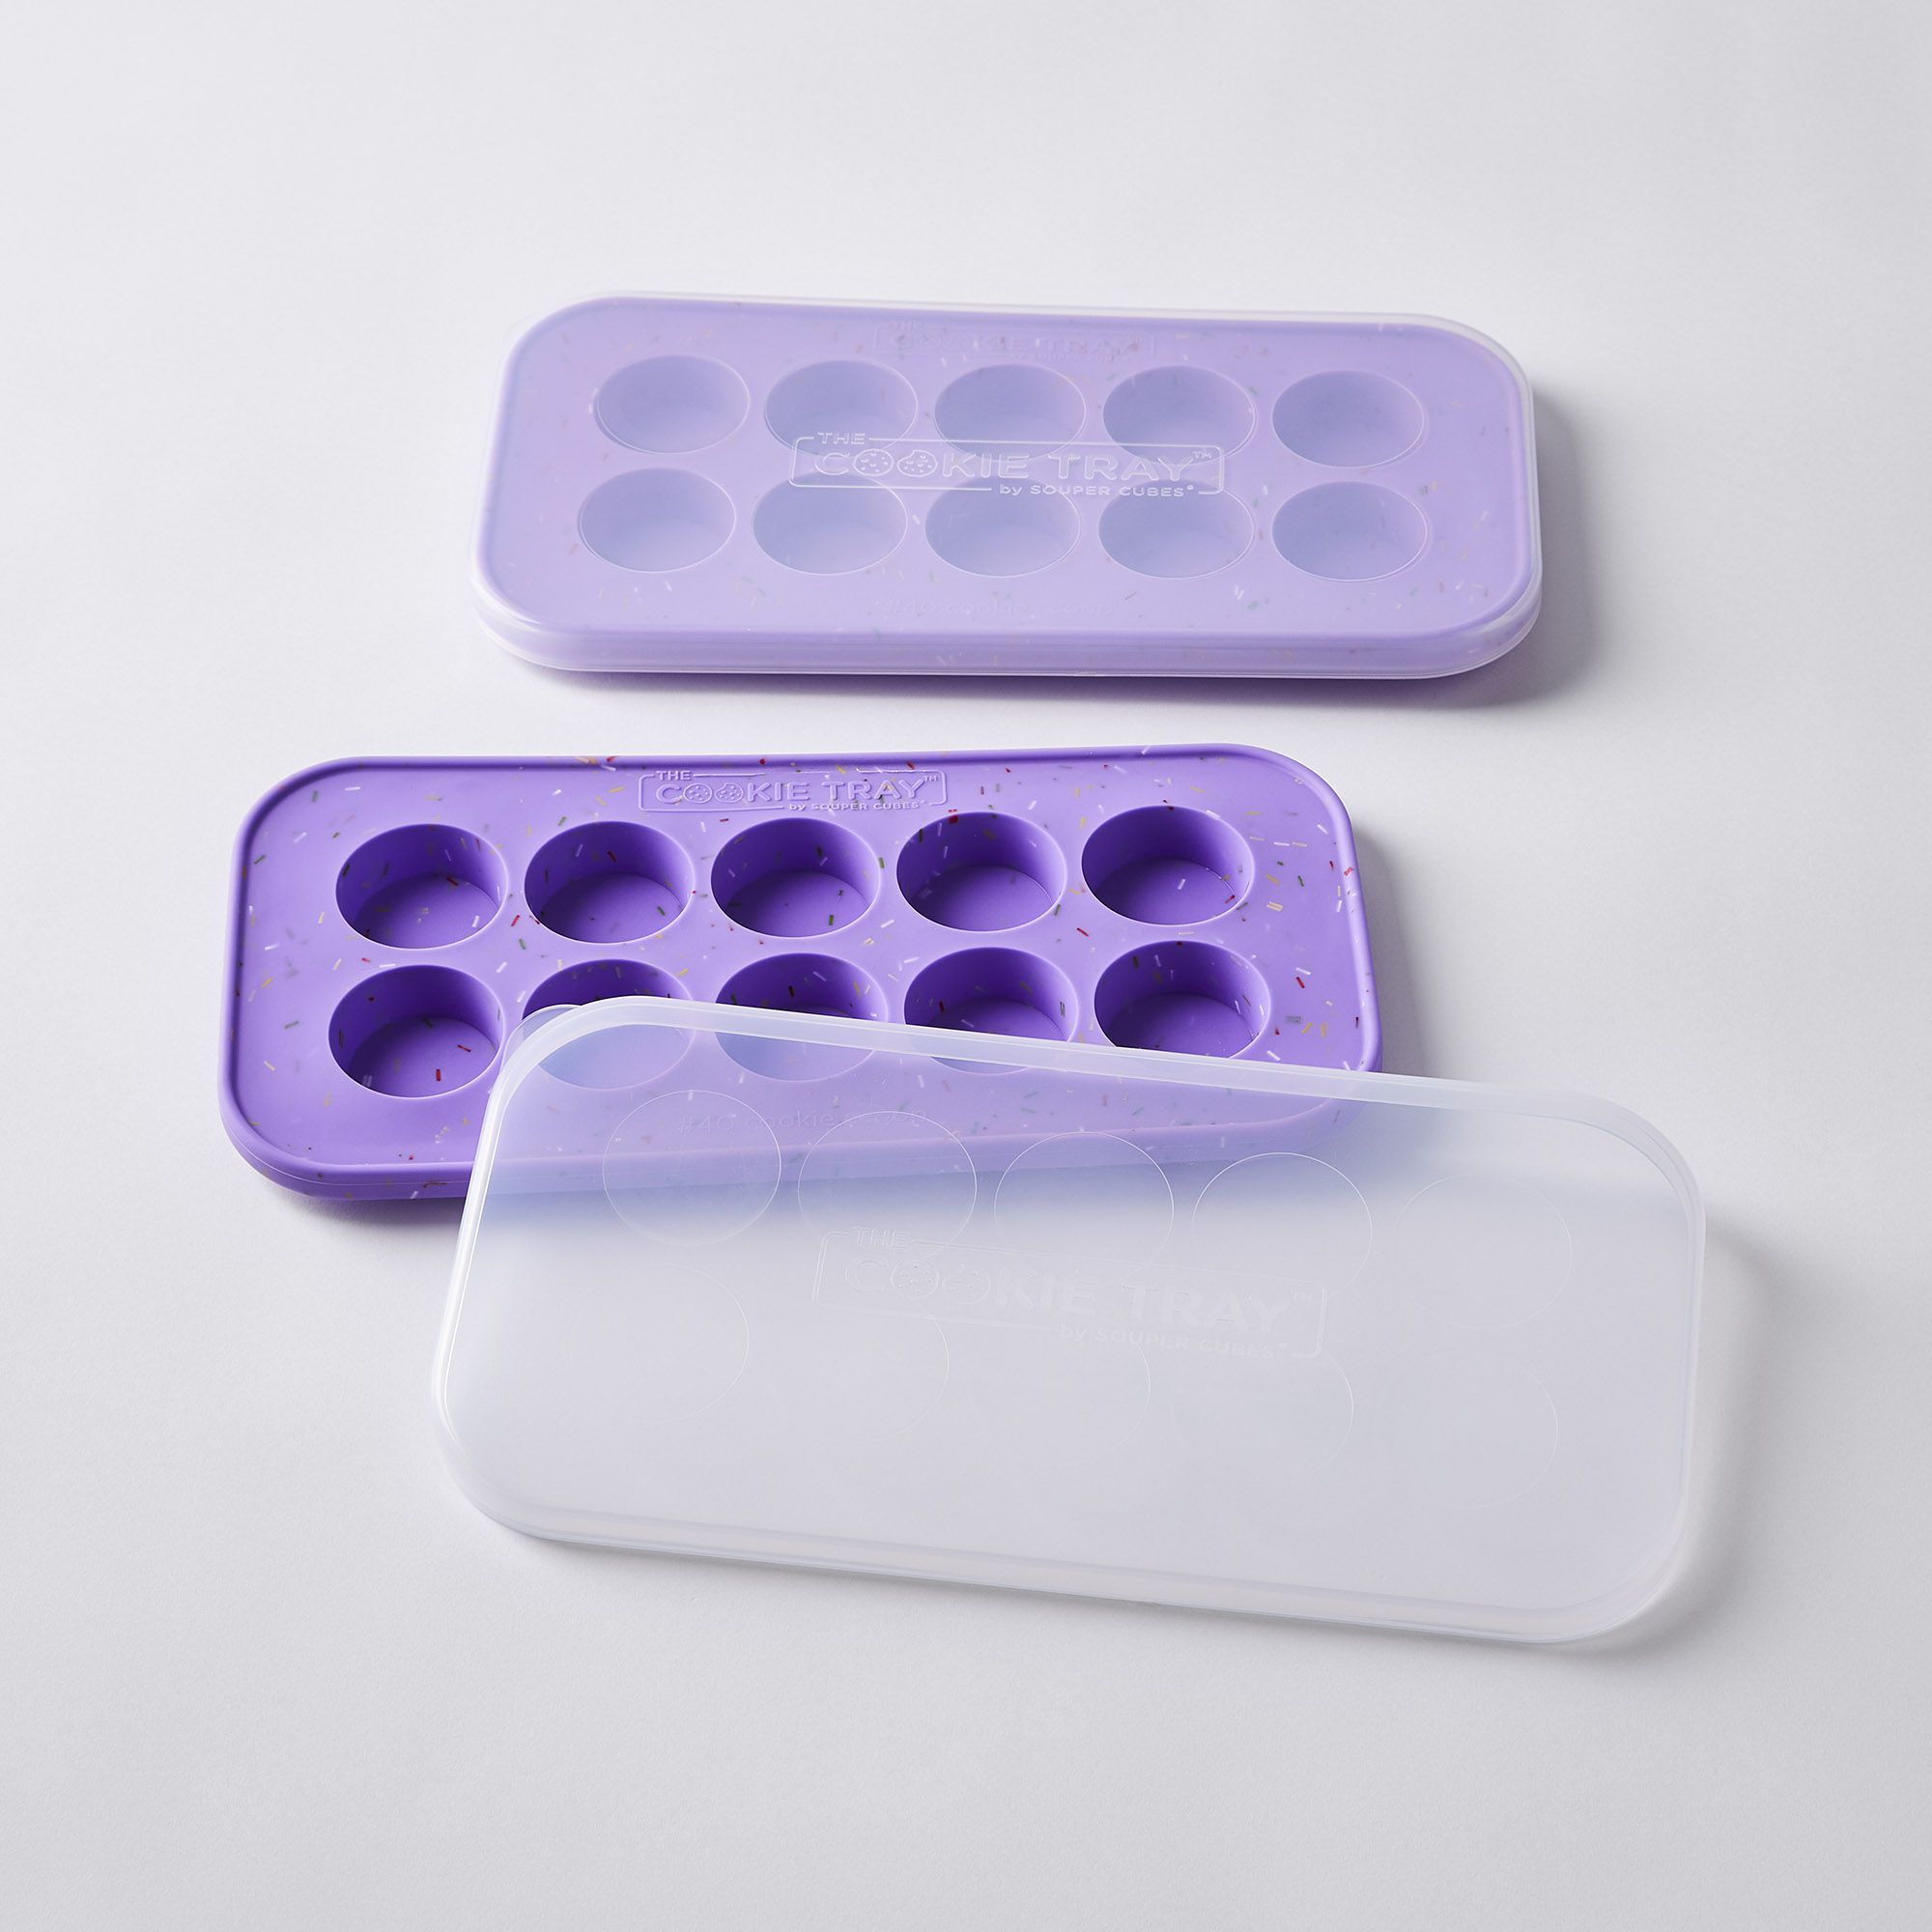  Souper Cubes The Cookie Tray - Silicone Molds for Baking -  Freeze and Store Perfect Cookie Dough Rounds - Convenient Baking Supplies -  Lavender With Sprinkles - 2-Pack: Home & Kitchen